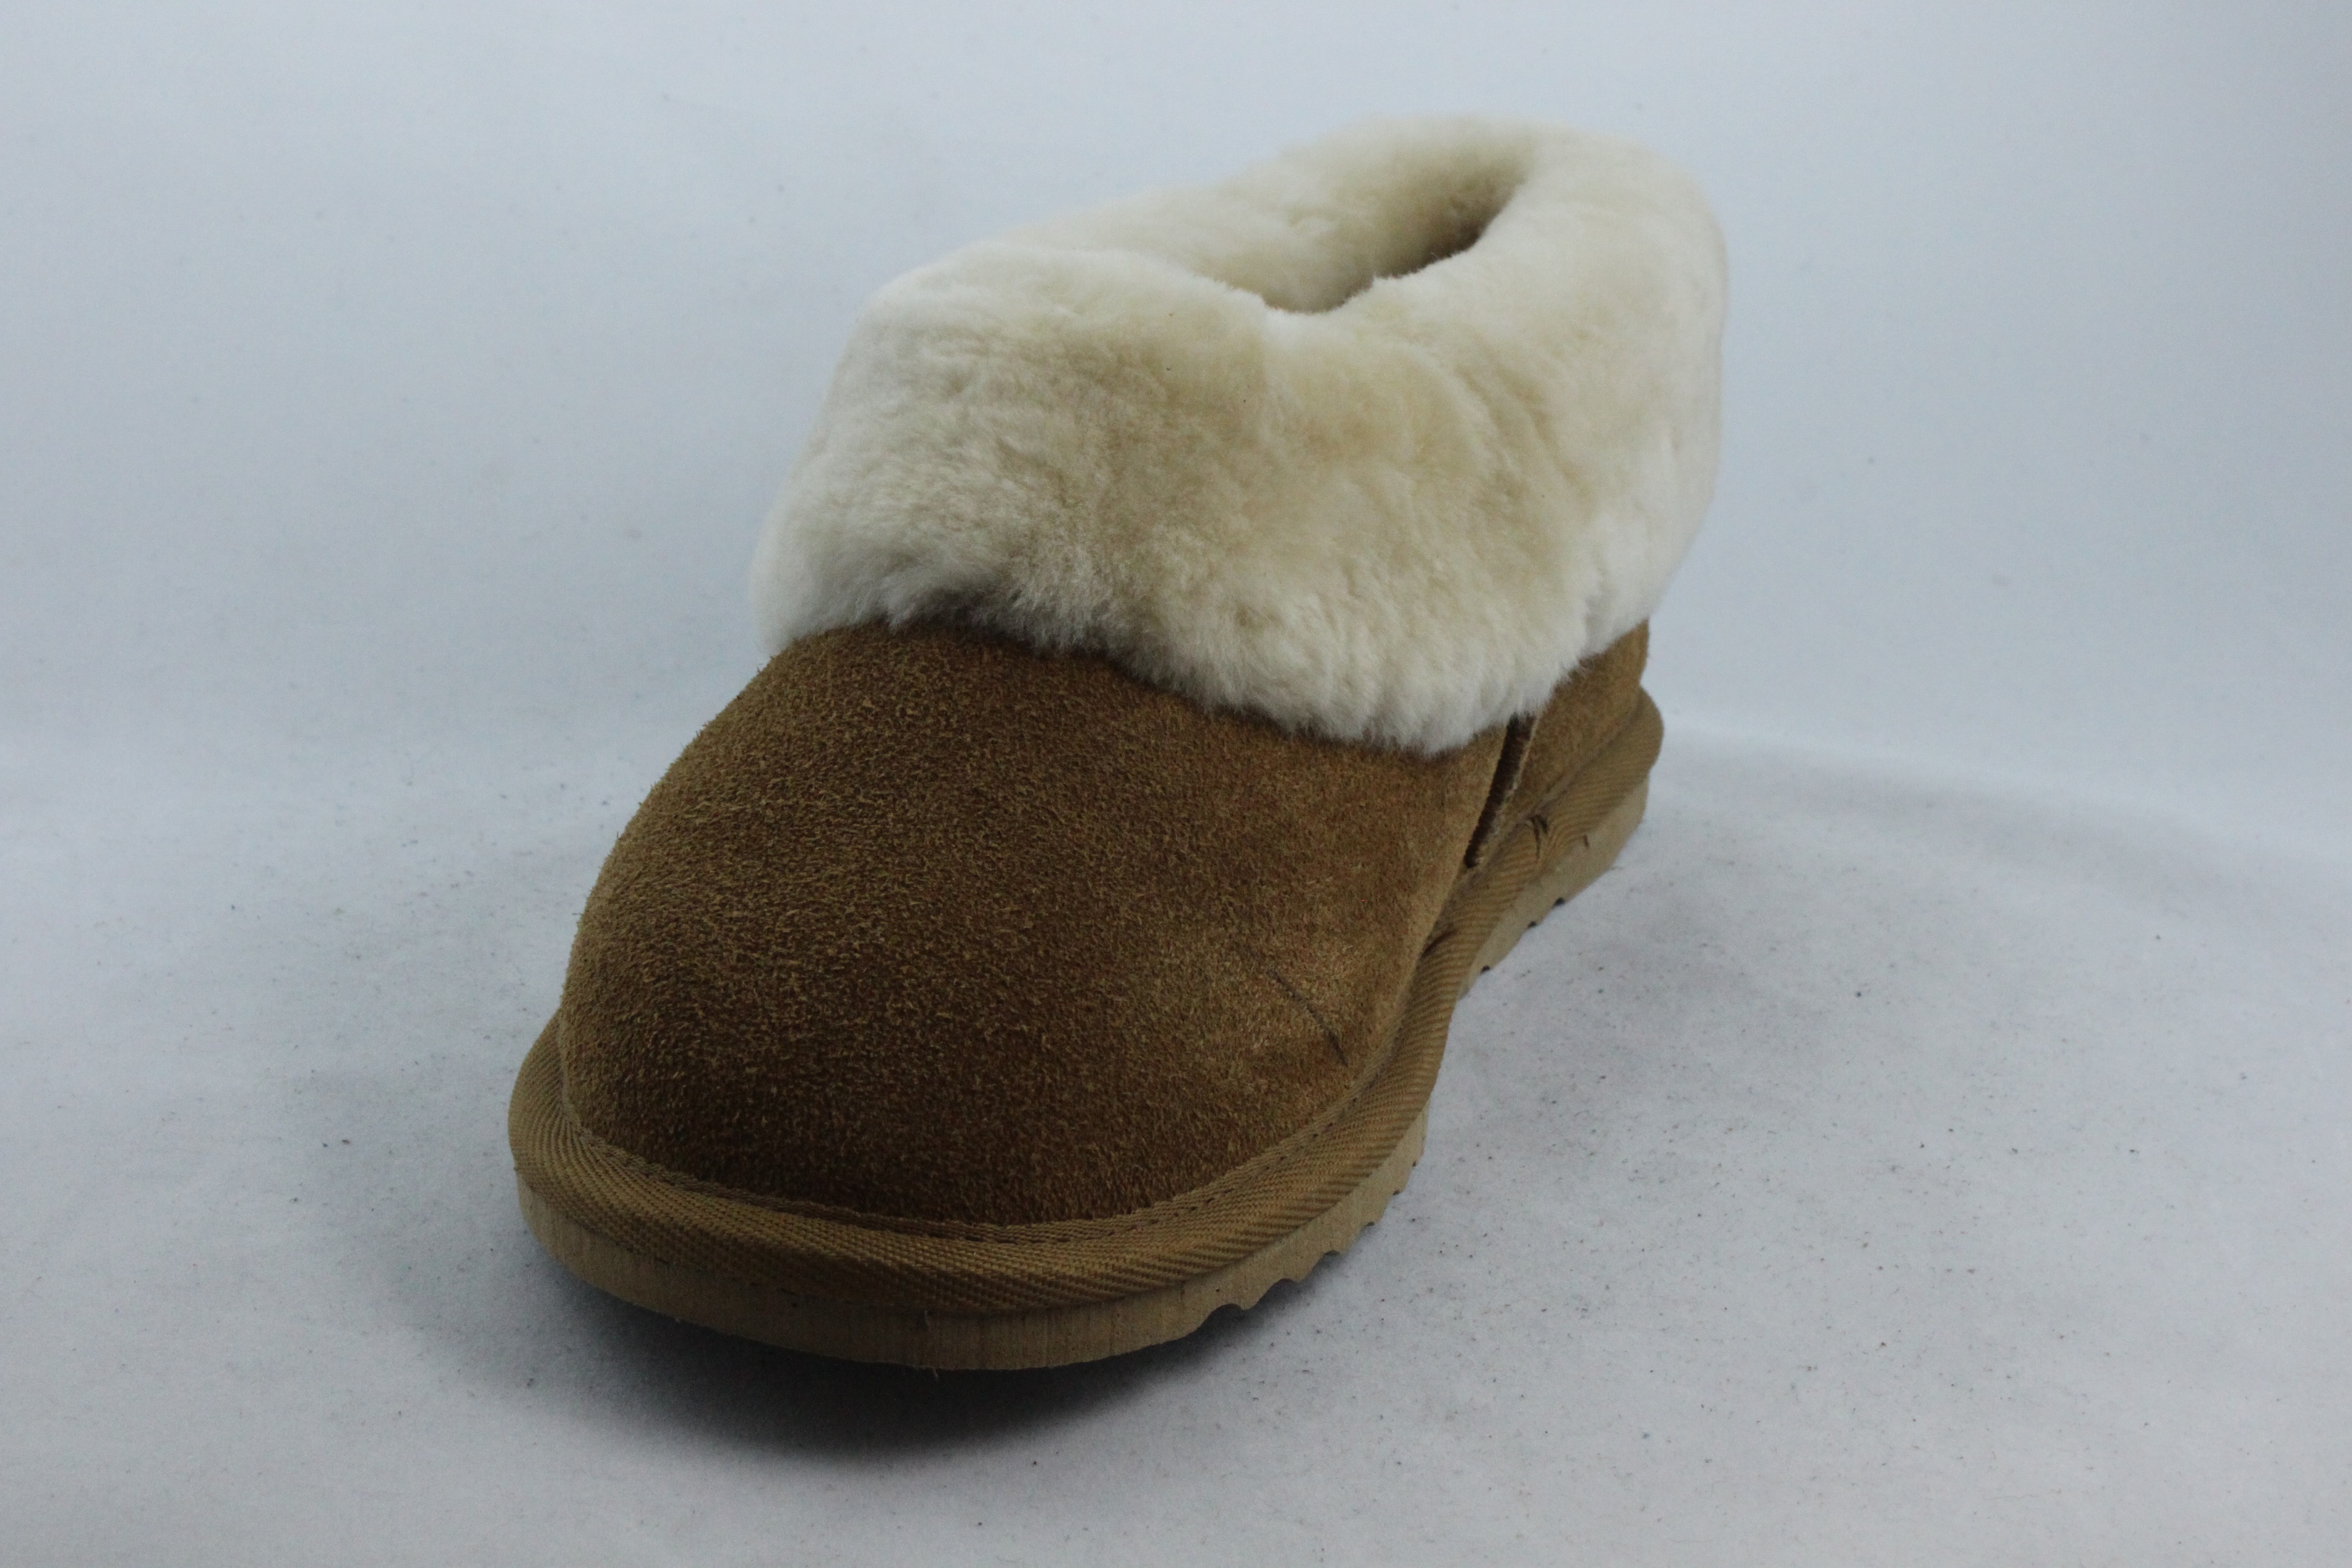 Ladies Sheepskin Slippers with full collar - Radford Leathers